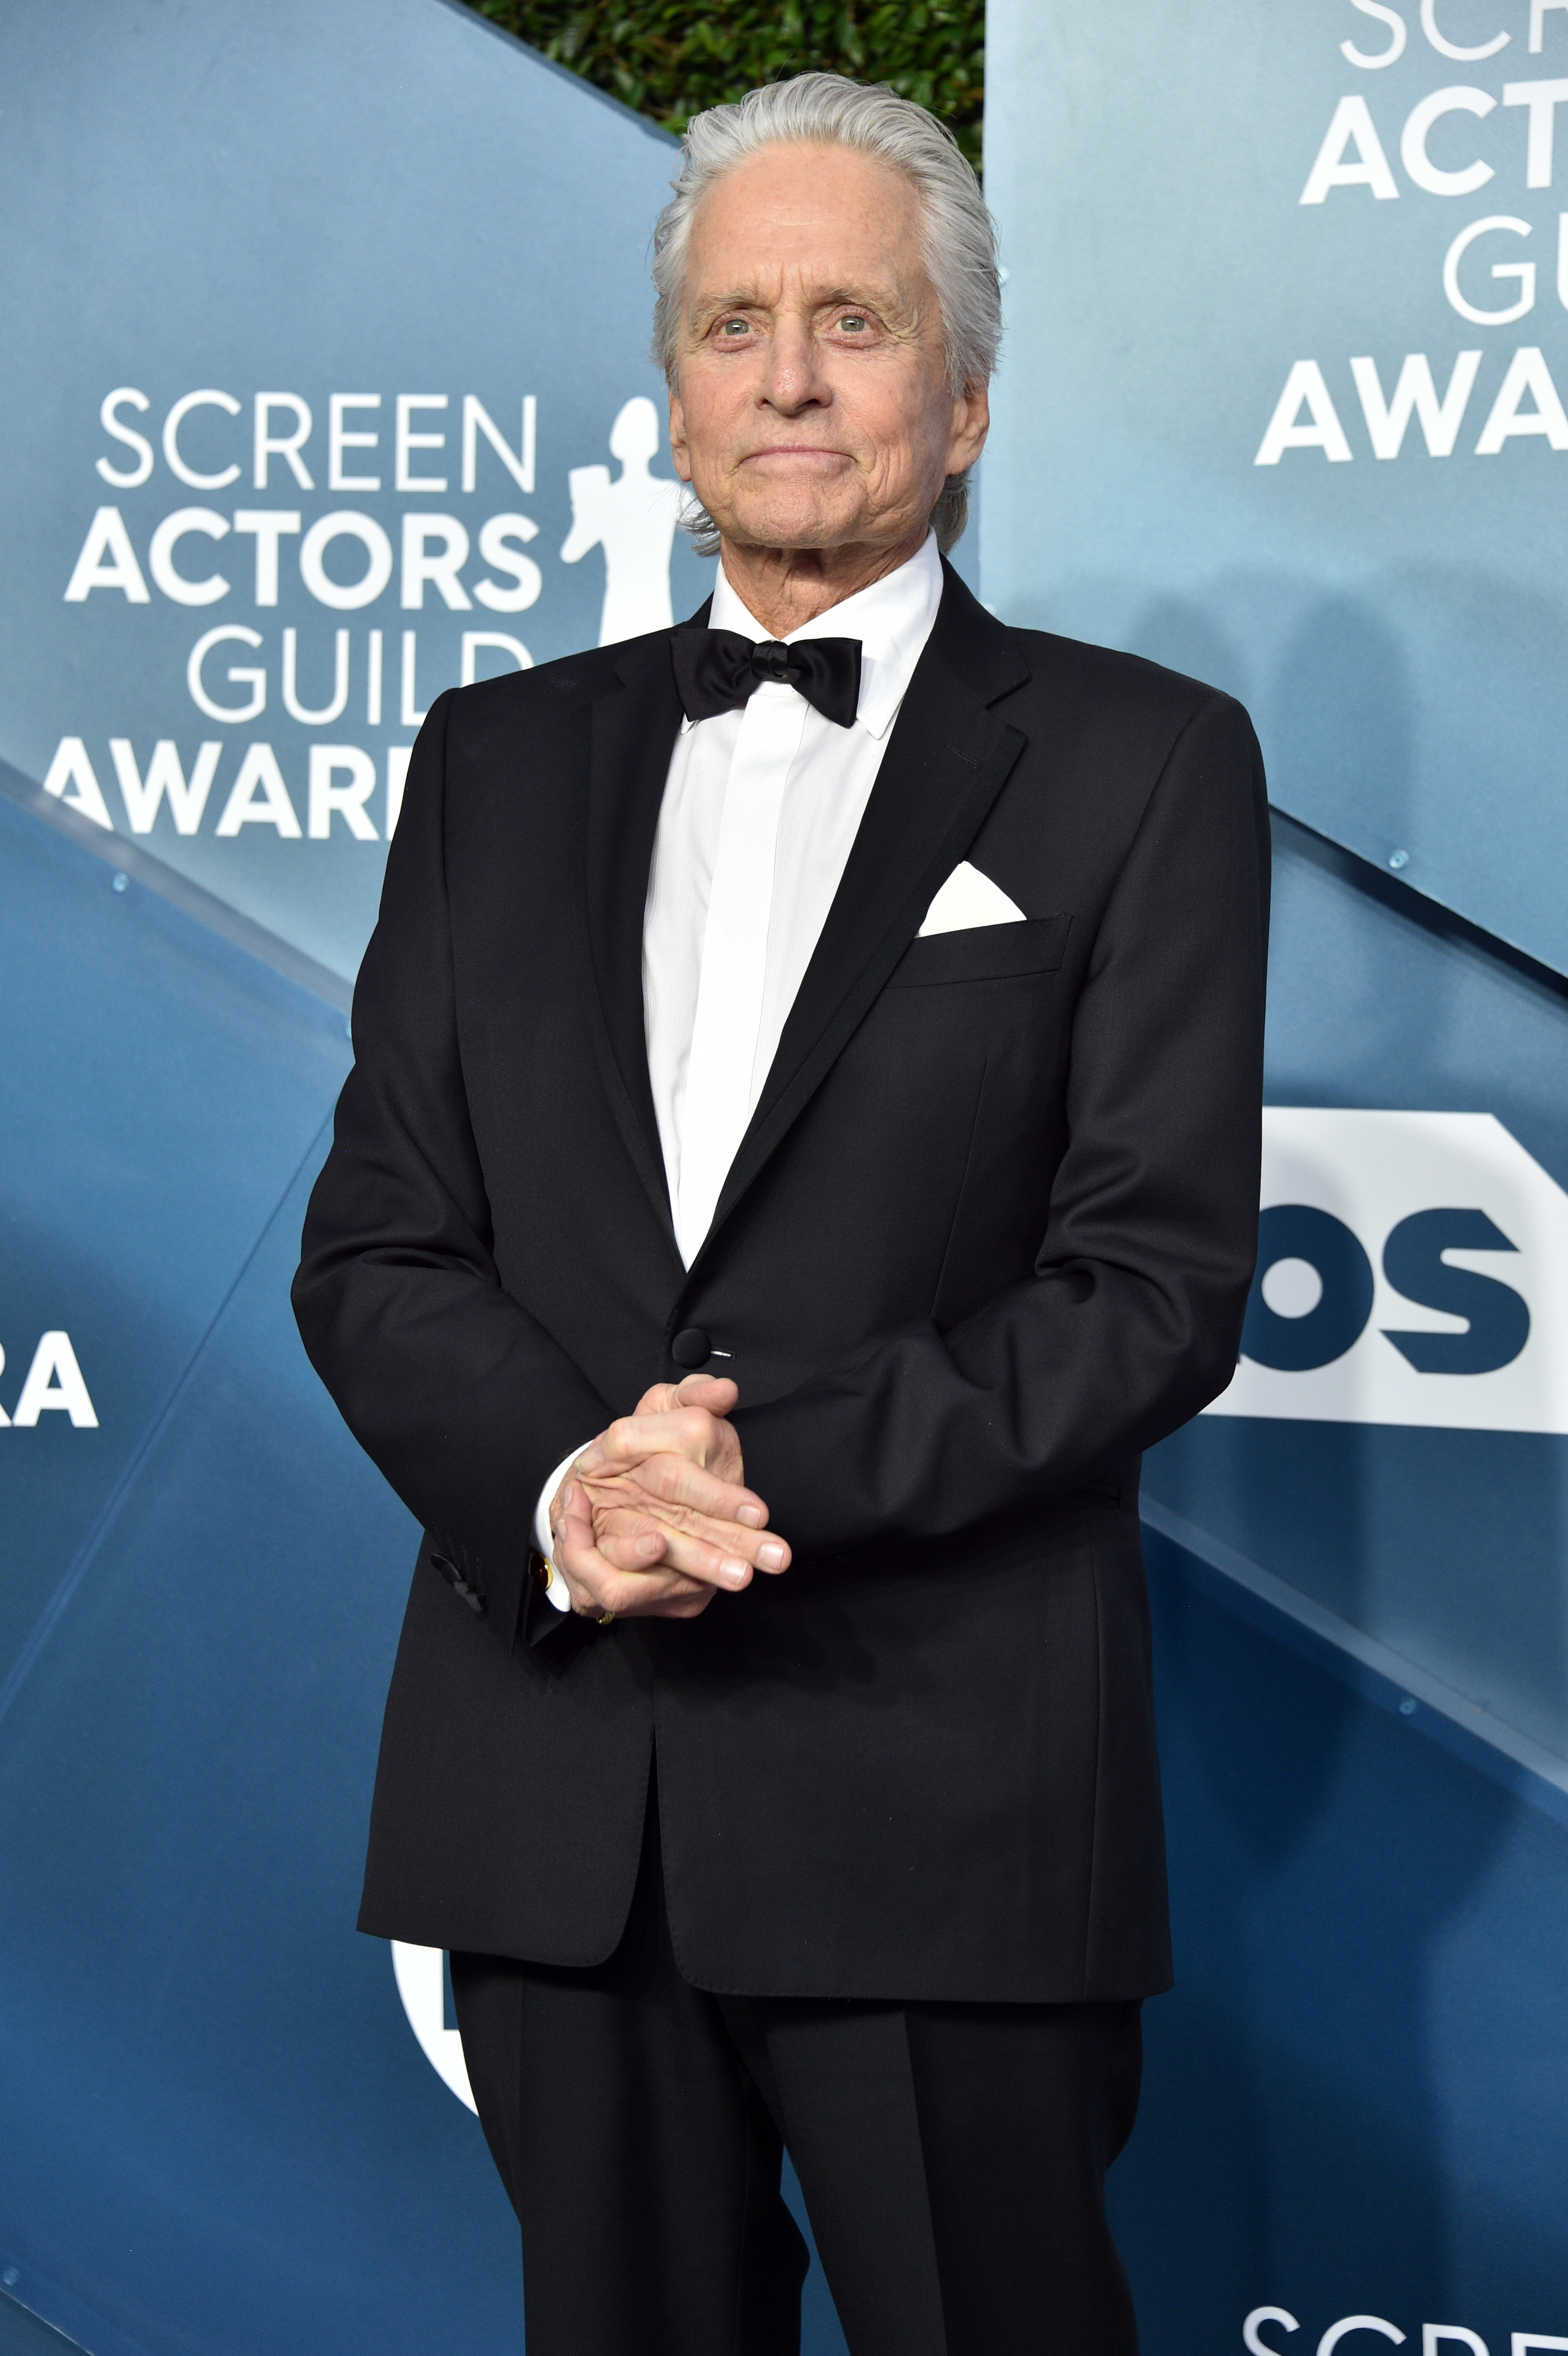 michael douglas - 2020 SAG Awards: See all the stars on the red carpet | Gallery | Wonderwall.com